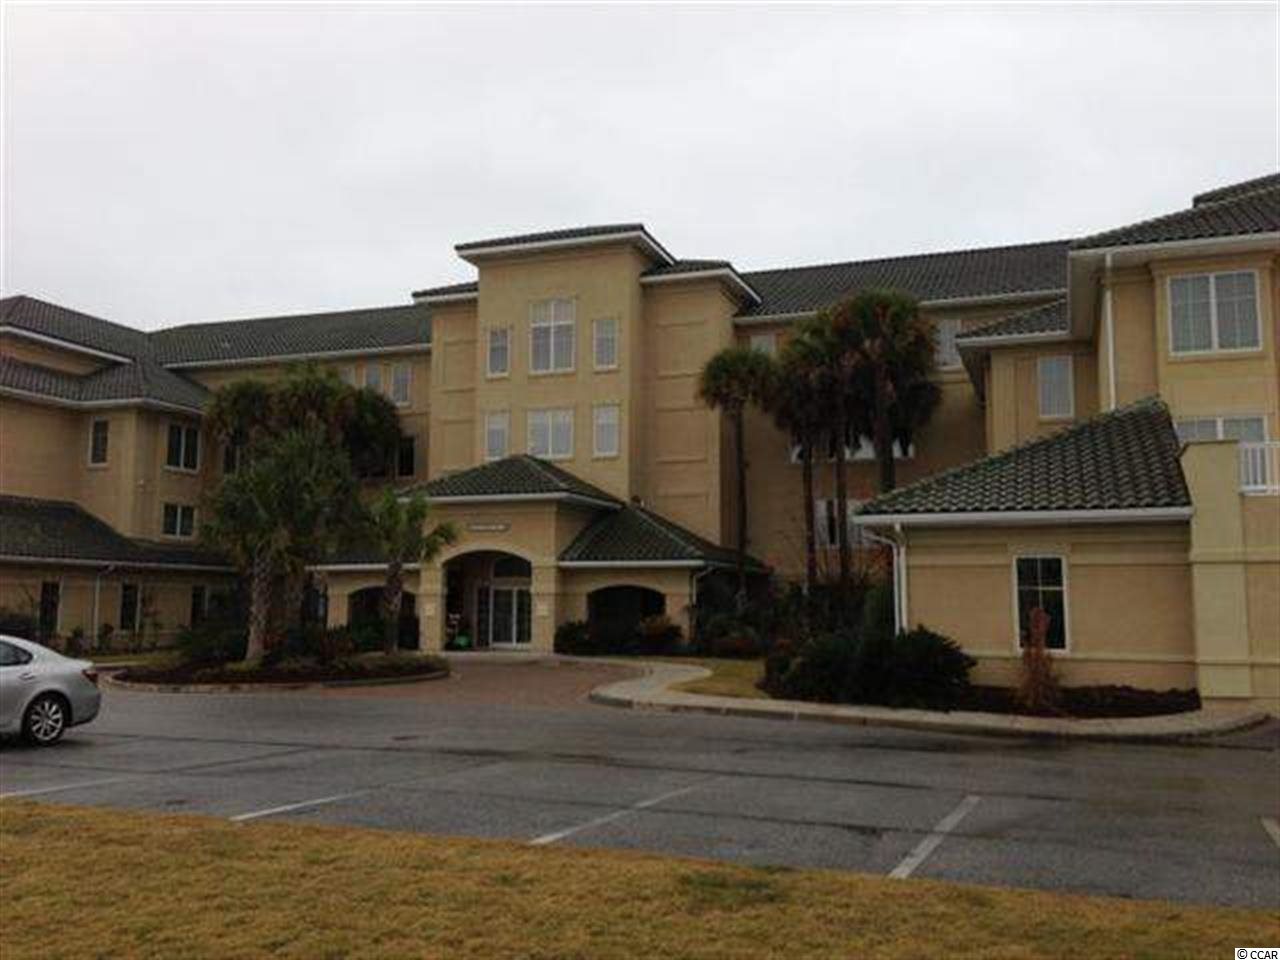  2180 Waterview Dr Unit 83, North Myrtle Beach, South Carolina  photo